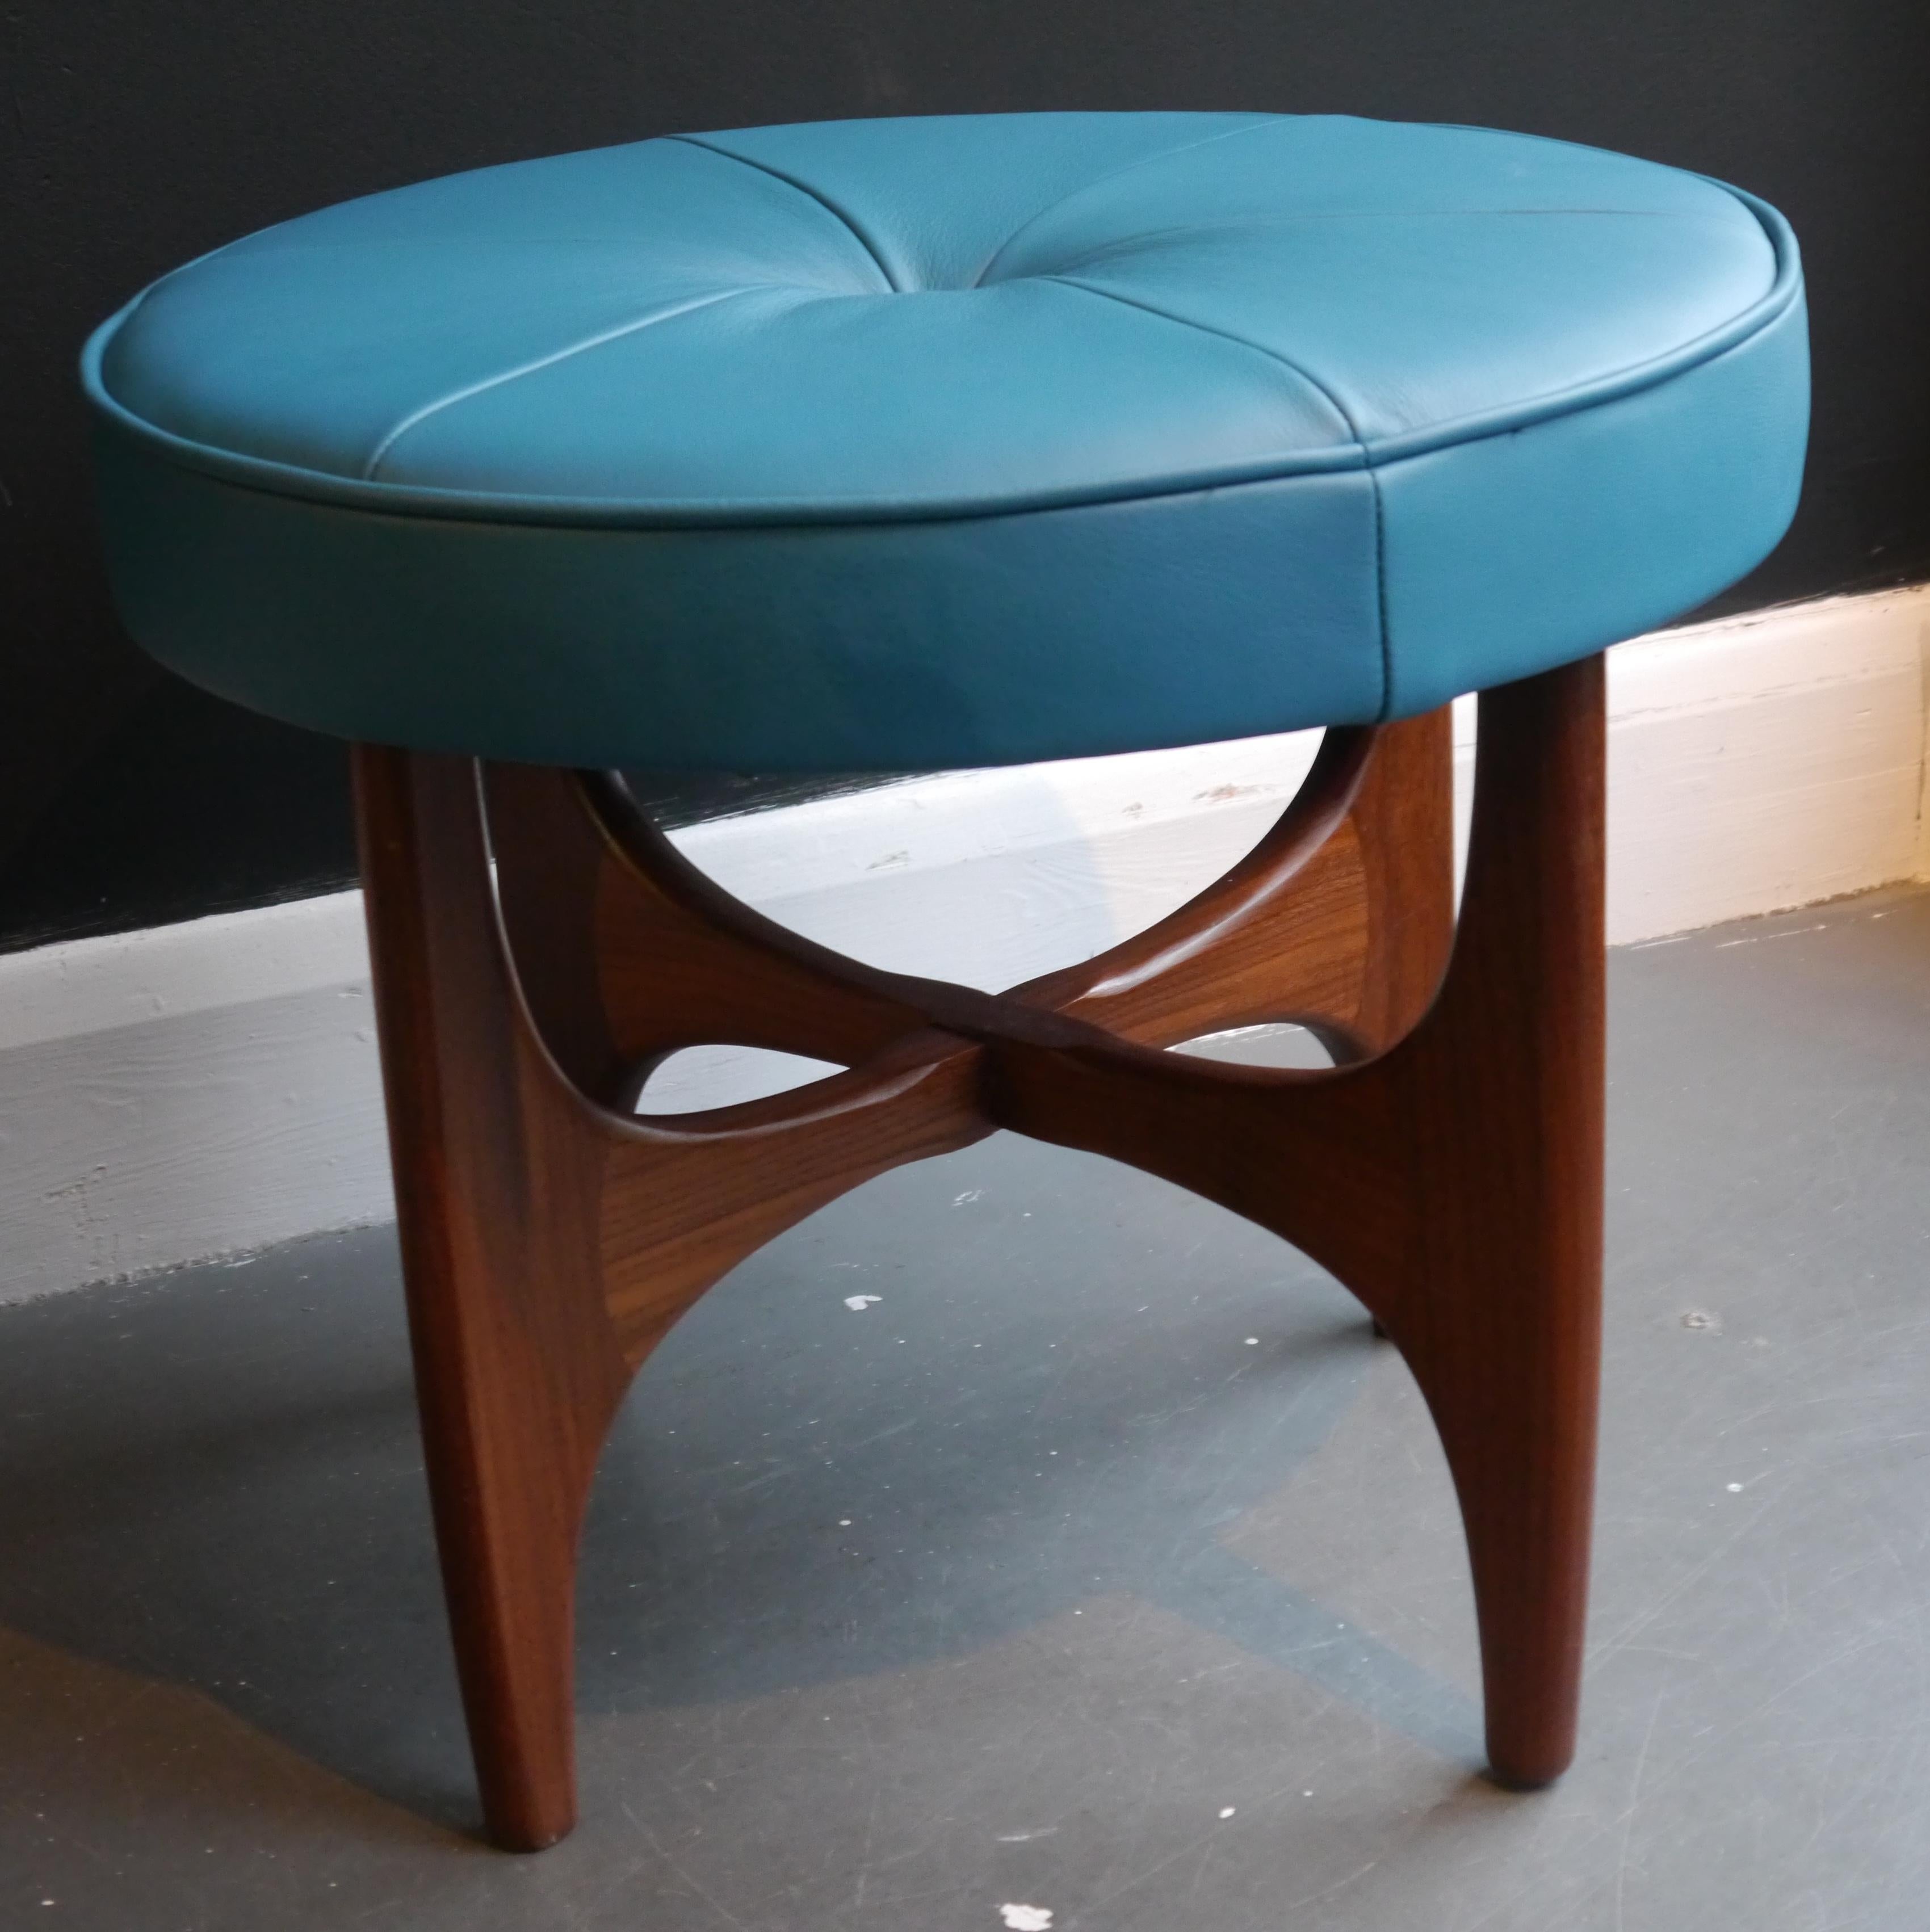 1970s English G-plan Teak based leather/cloth footstool designed by Kofod larsen In Good Condition For Sale In London, GB